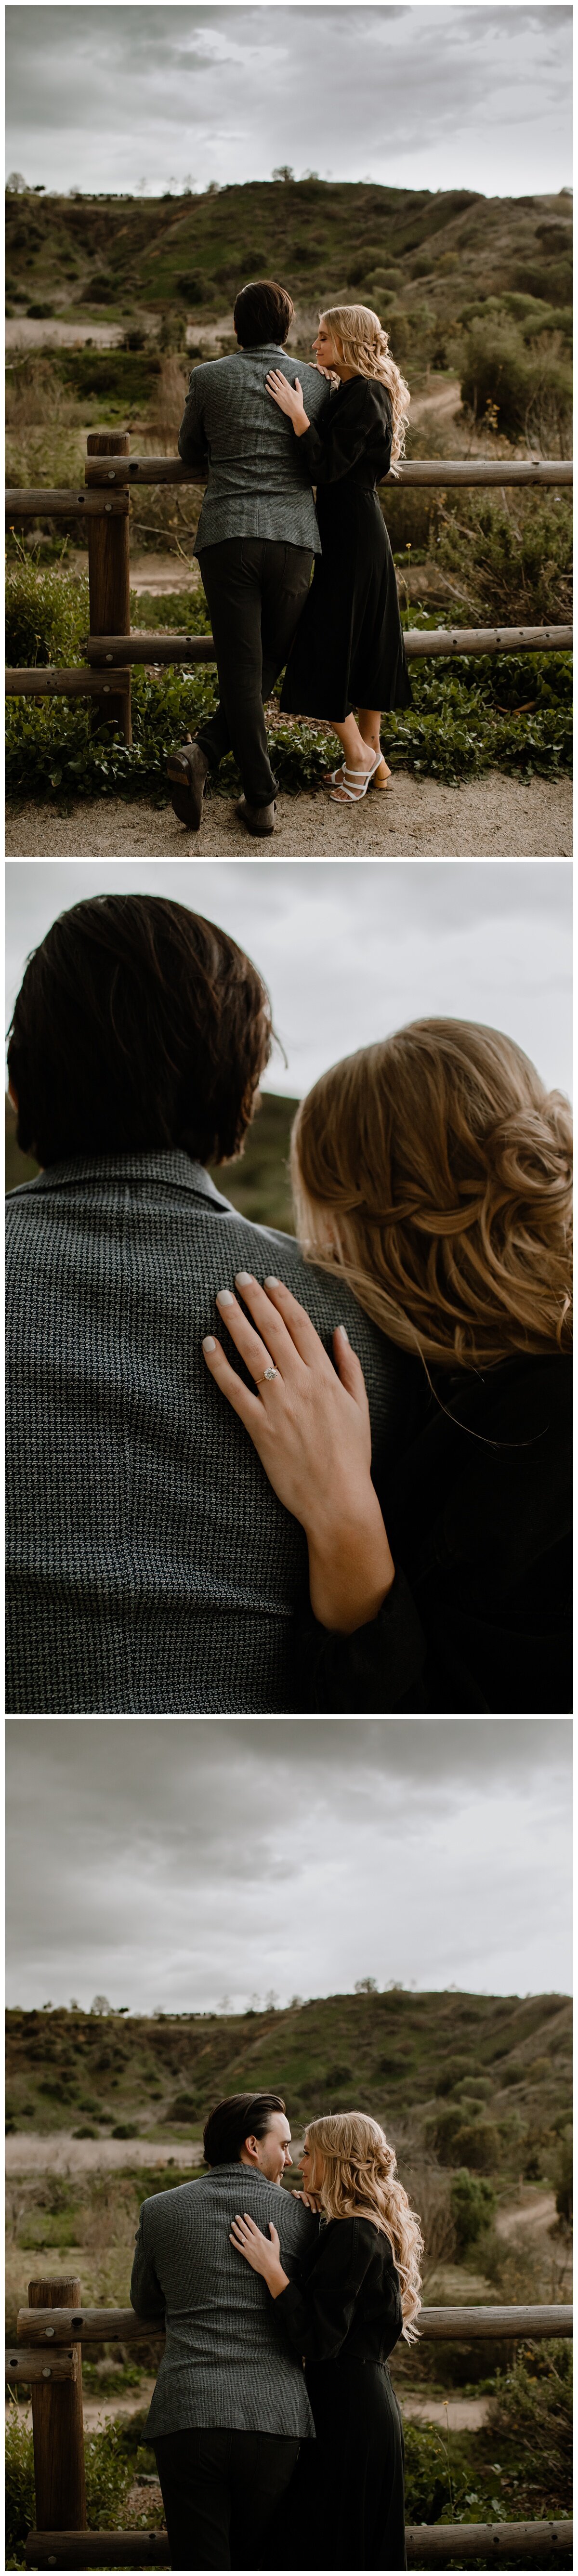 Carbon Canyon Park Orange County - Madeline and Scott Engagement Session - Eve Rox Photography-212_WEB.jpg